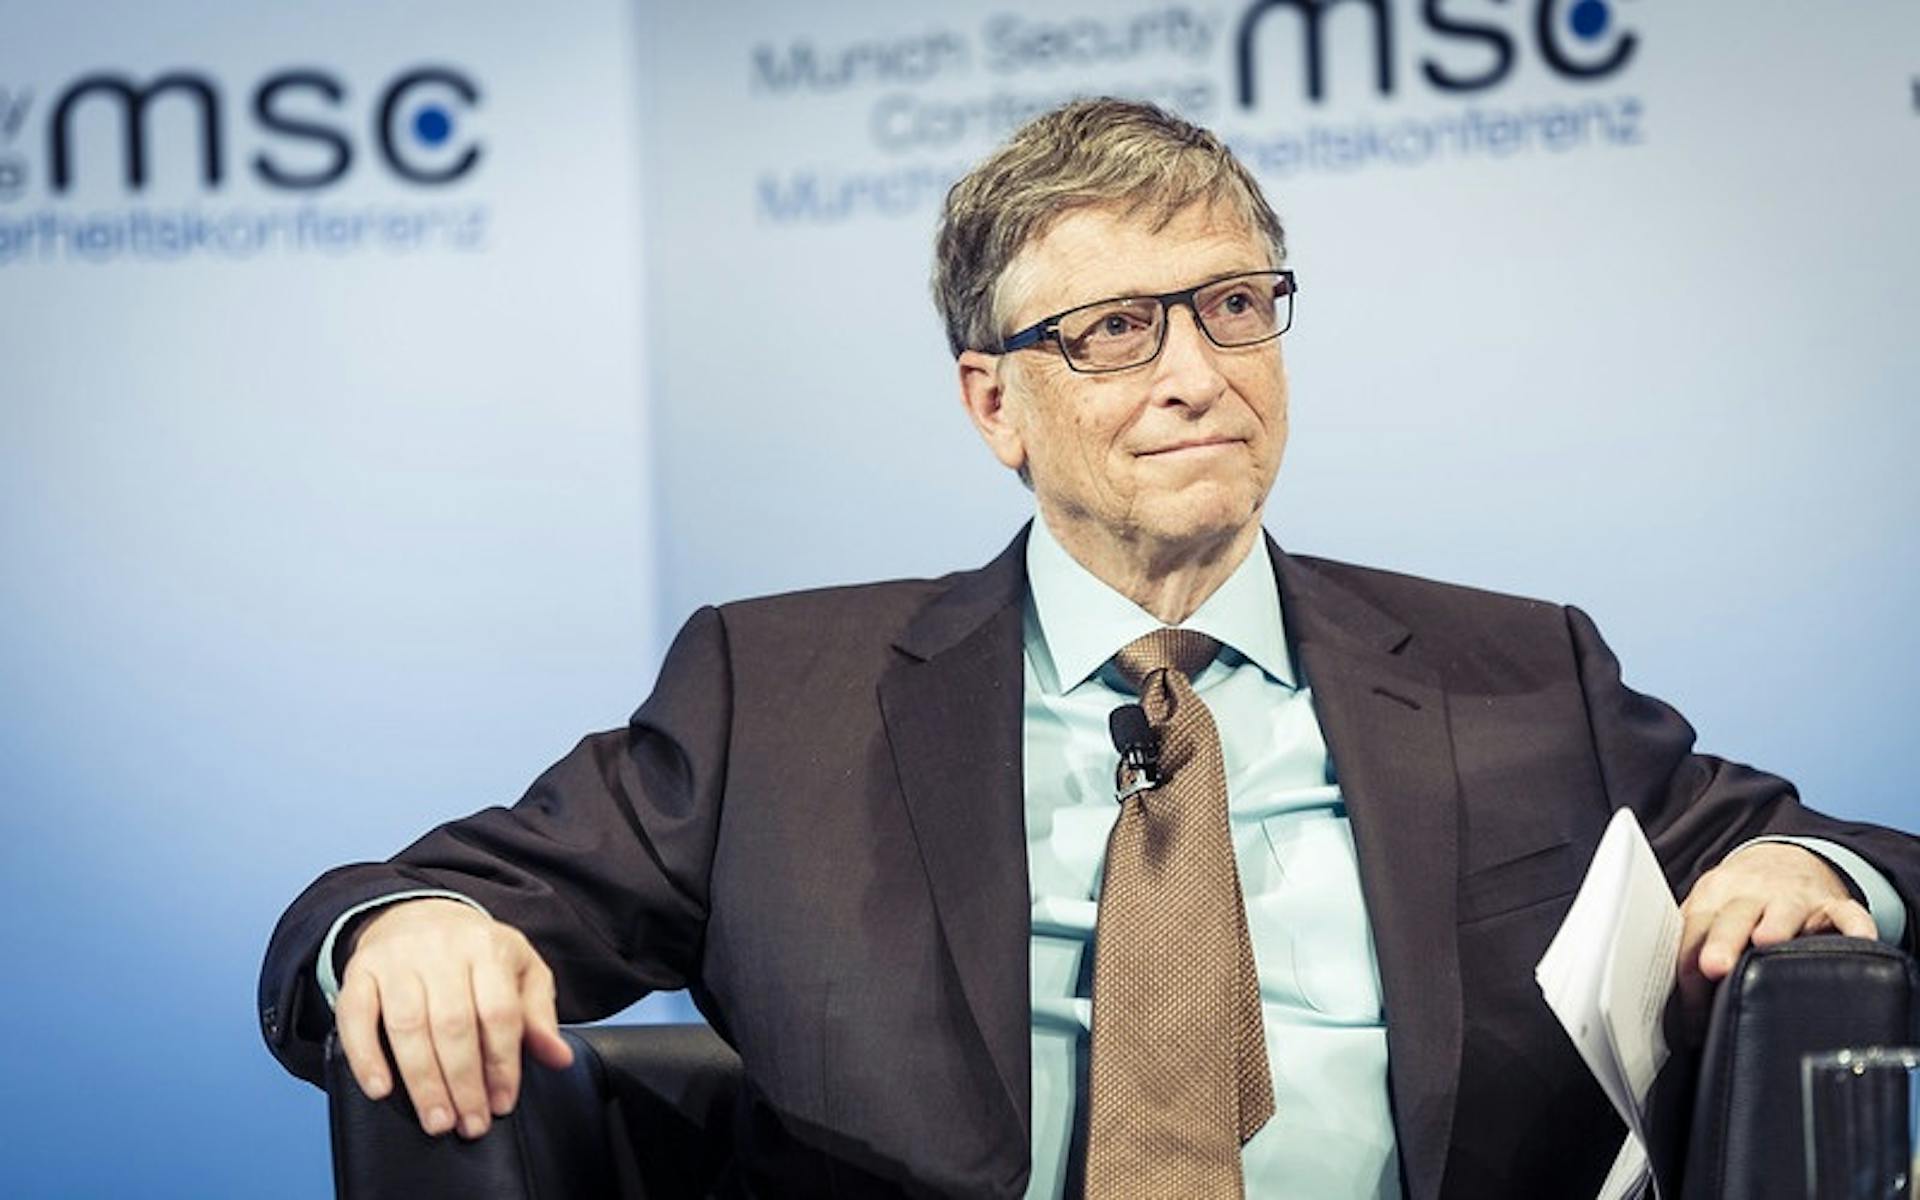 Gates was not convinced of Slack's potential and opted out of a 9-figure deal. Photograph: Greg Rubenstein.